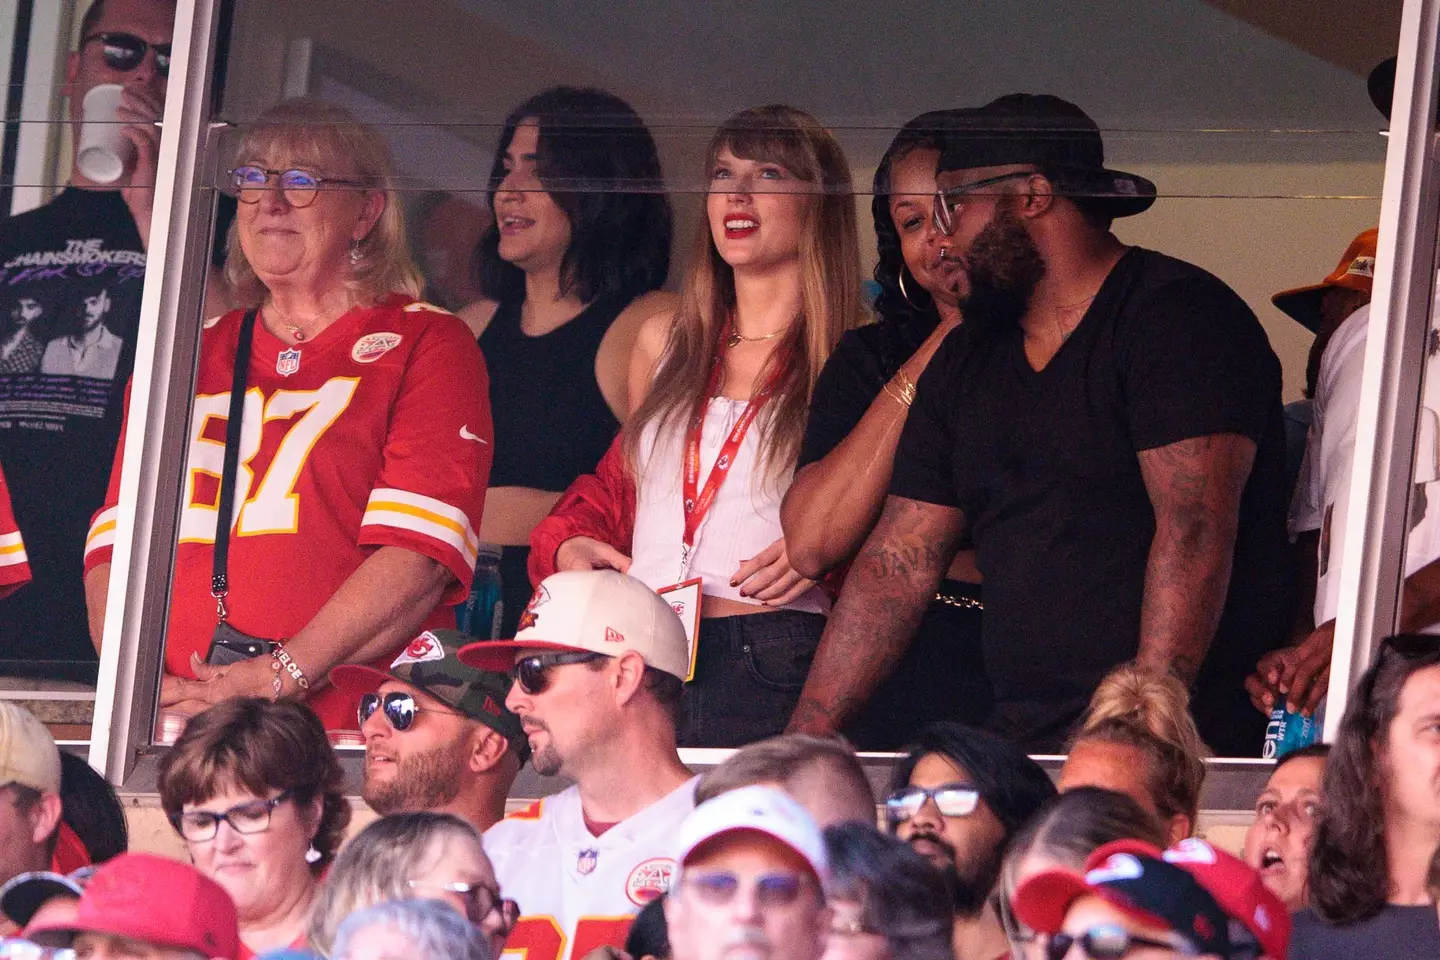 Swift had previously gone to watch Kelce play.